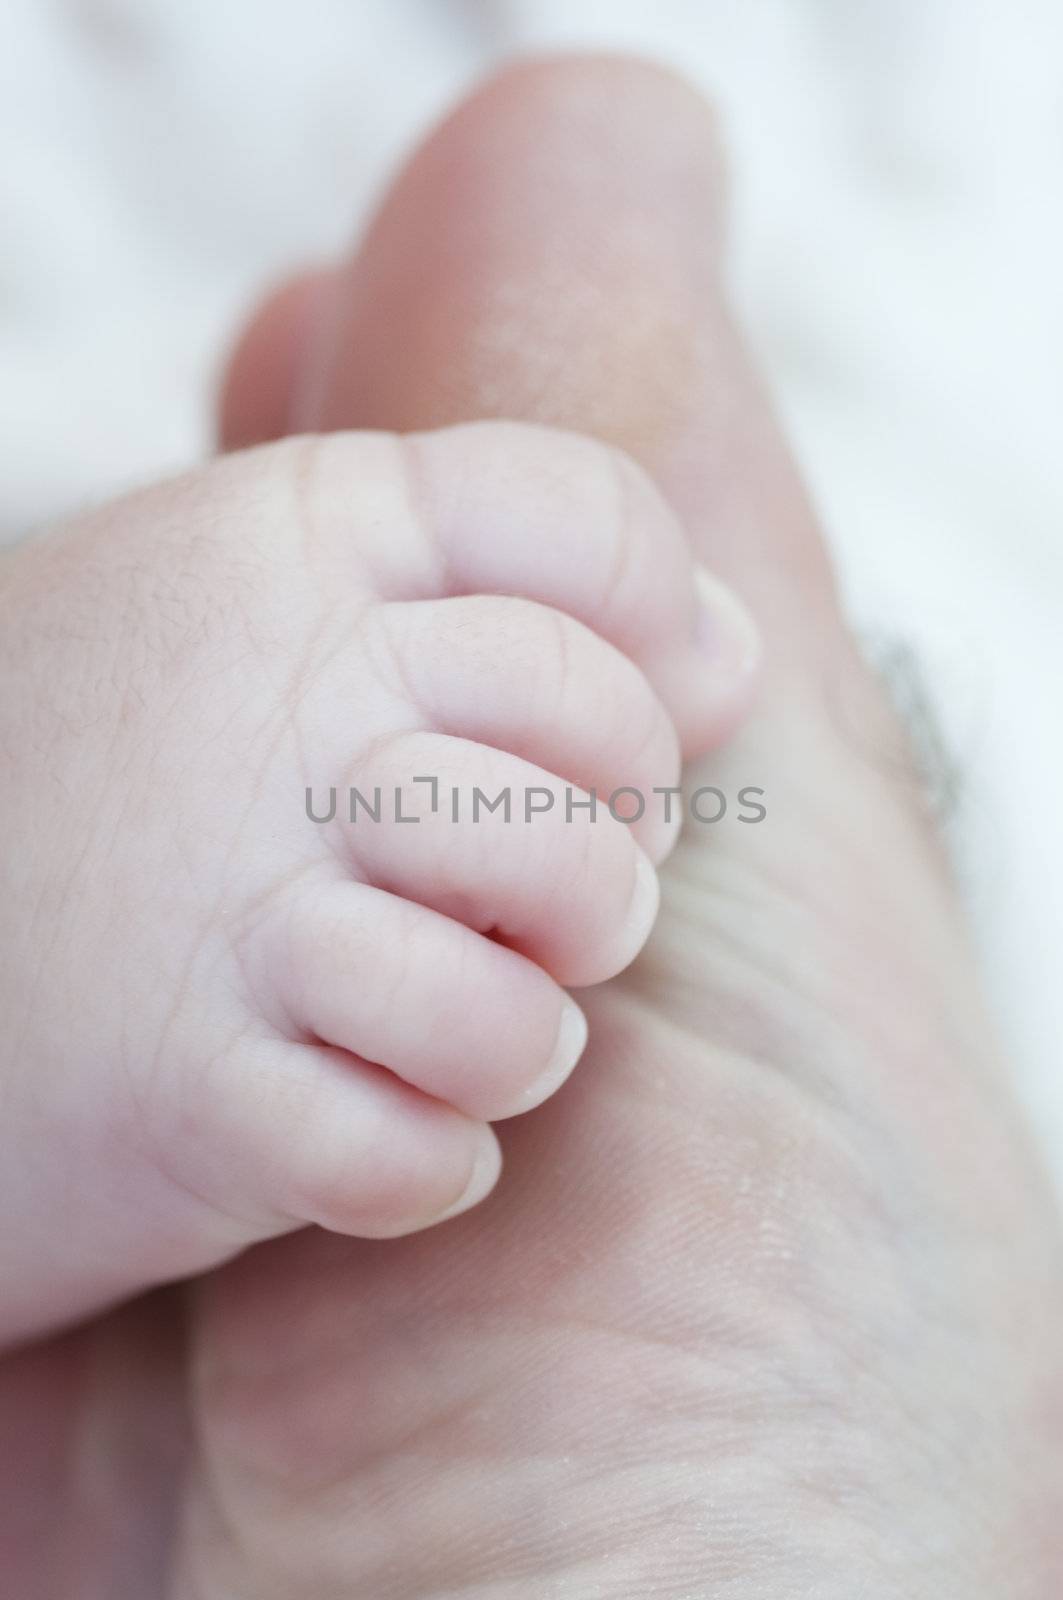 Picture of a new born foot.